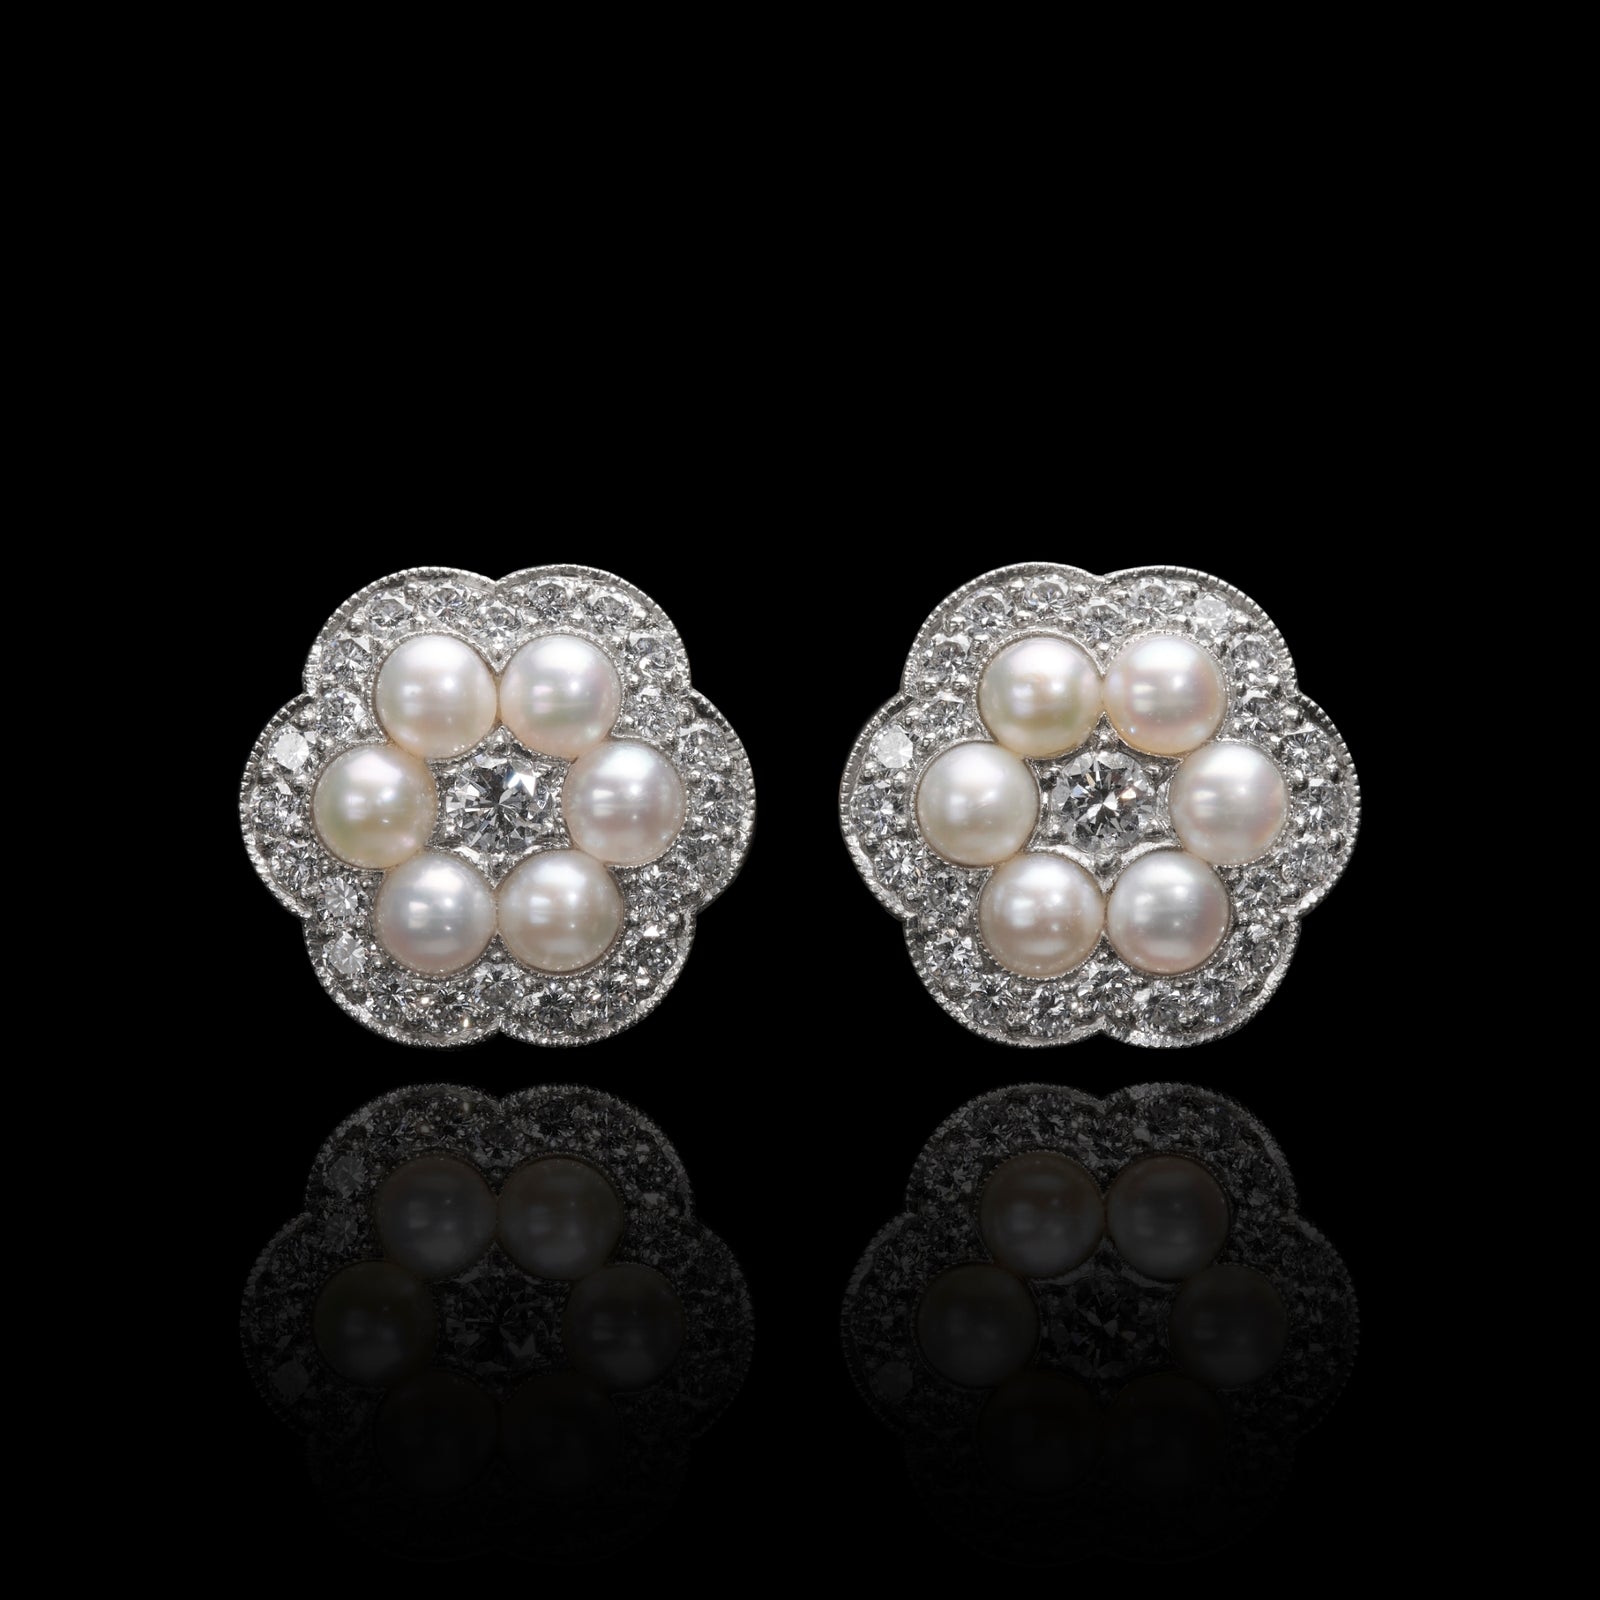 A Unique Pair of Natural Pearl & Diamond Cluster Earrings